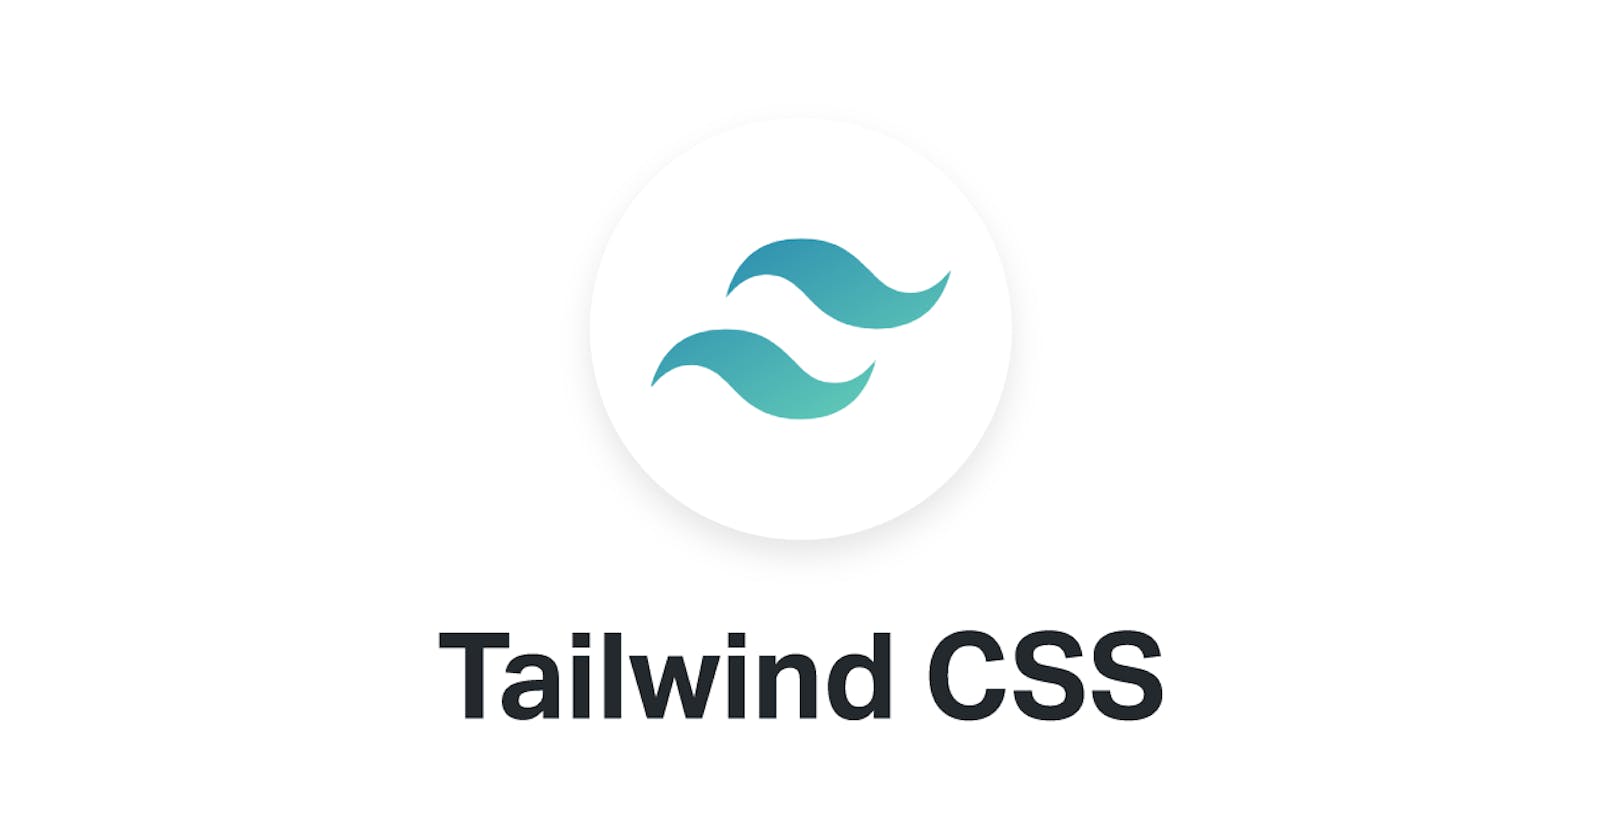 How to install React and Tailwind CSS for beginners